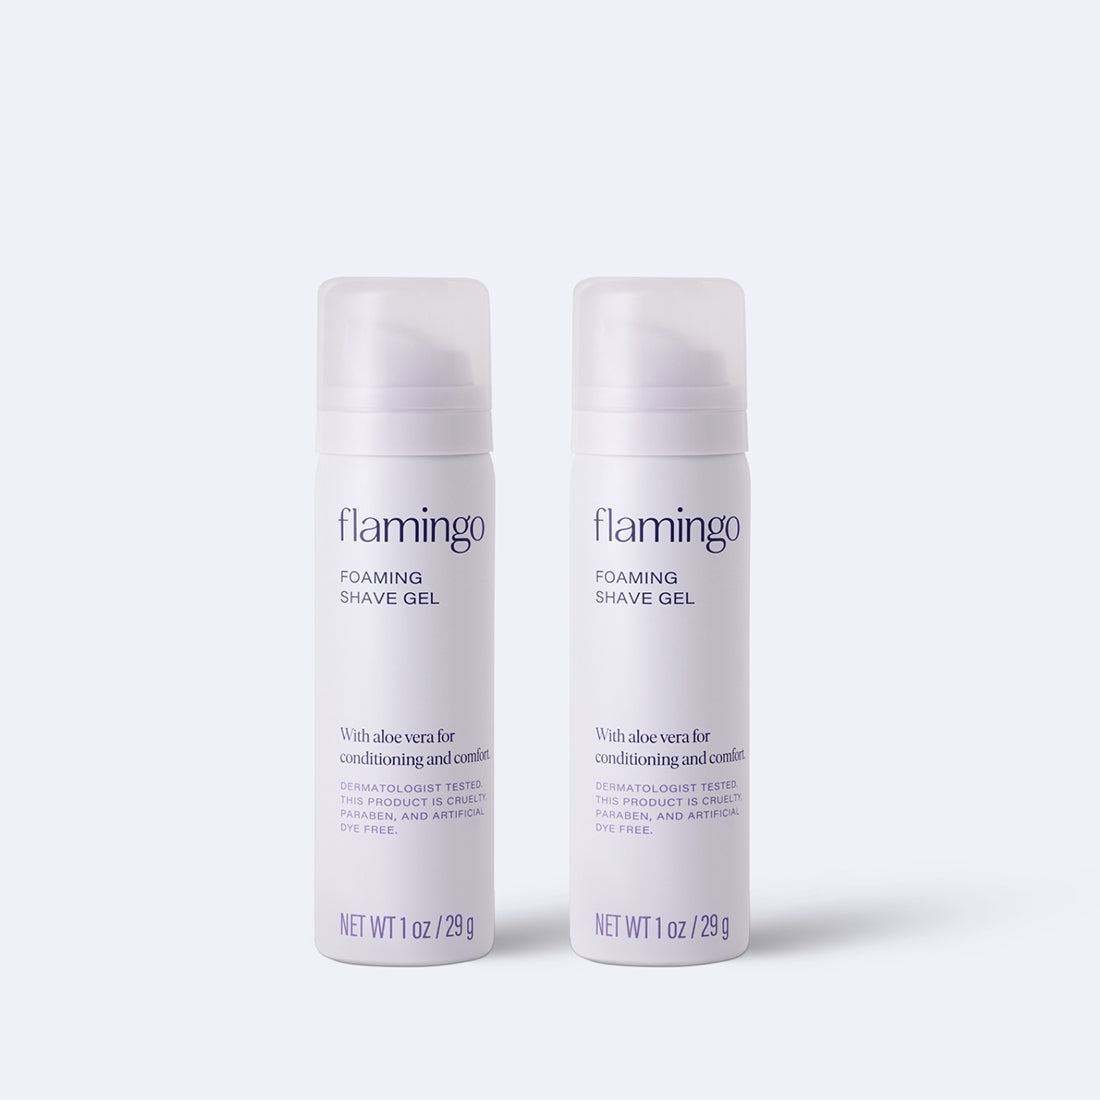 Two light grey cans of Flamingo Mini Foaming Shave Gel